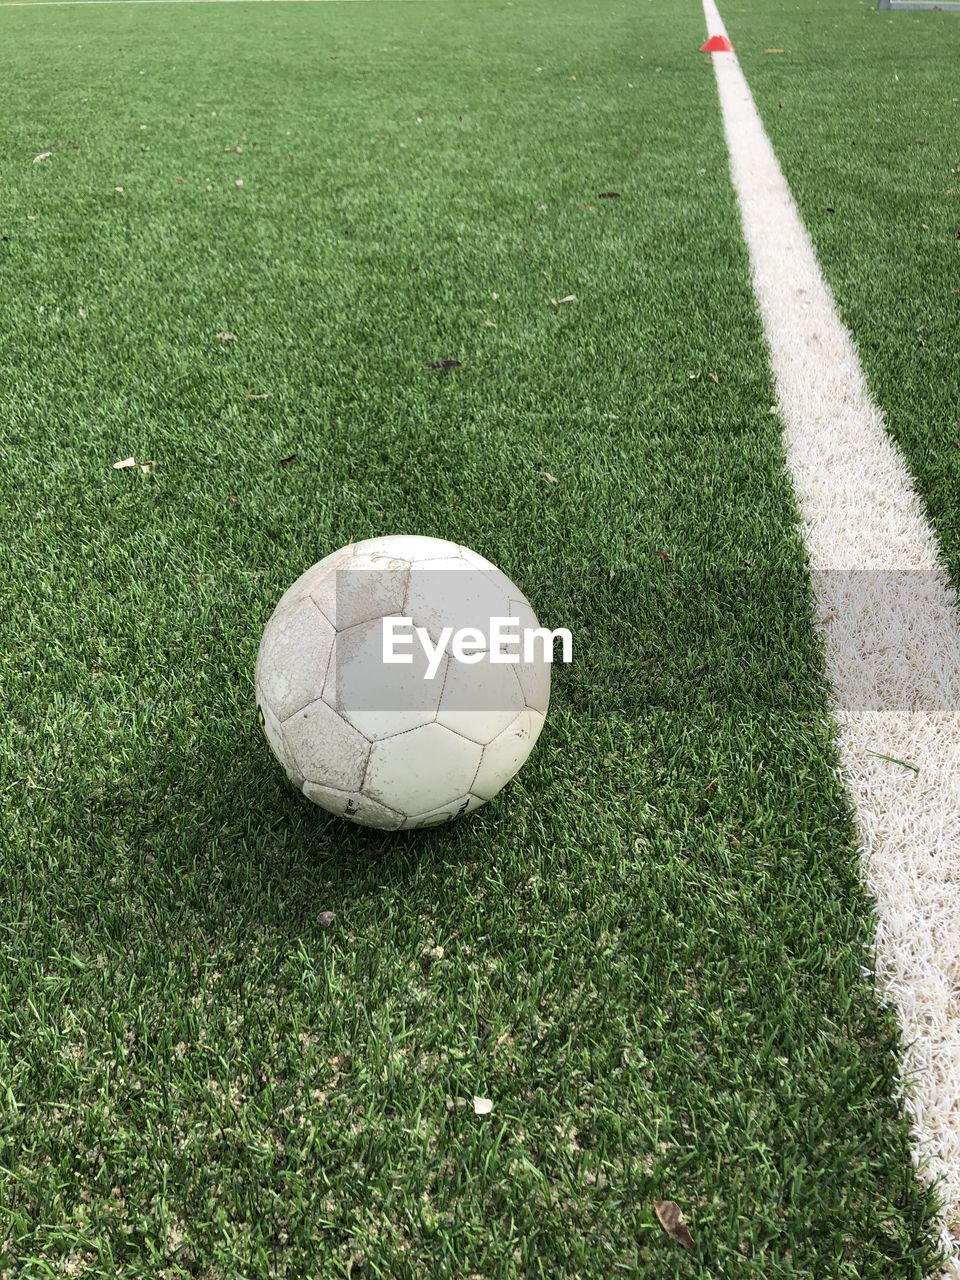 HIGH ANGLE VIEW OF BALL ON FIELD